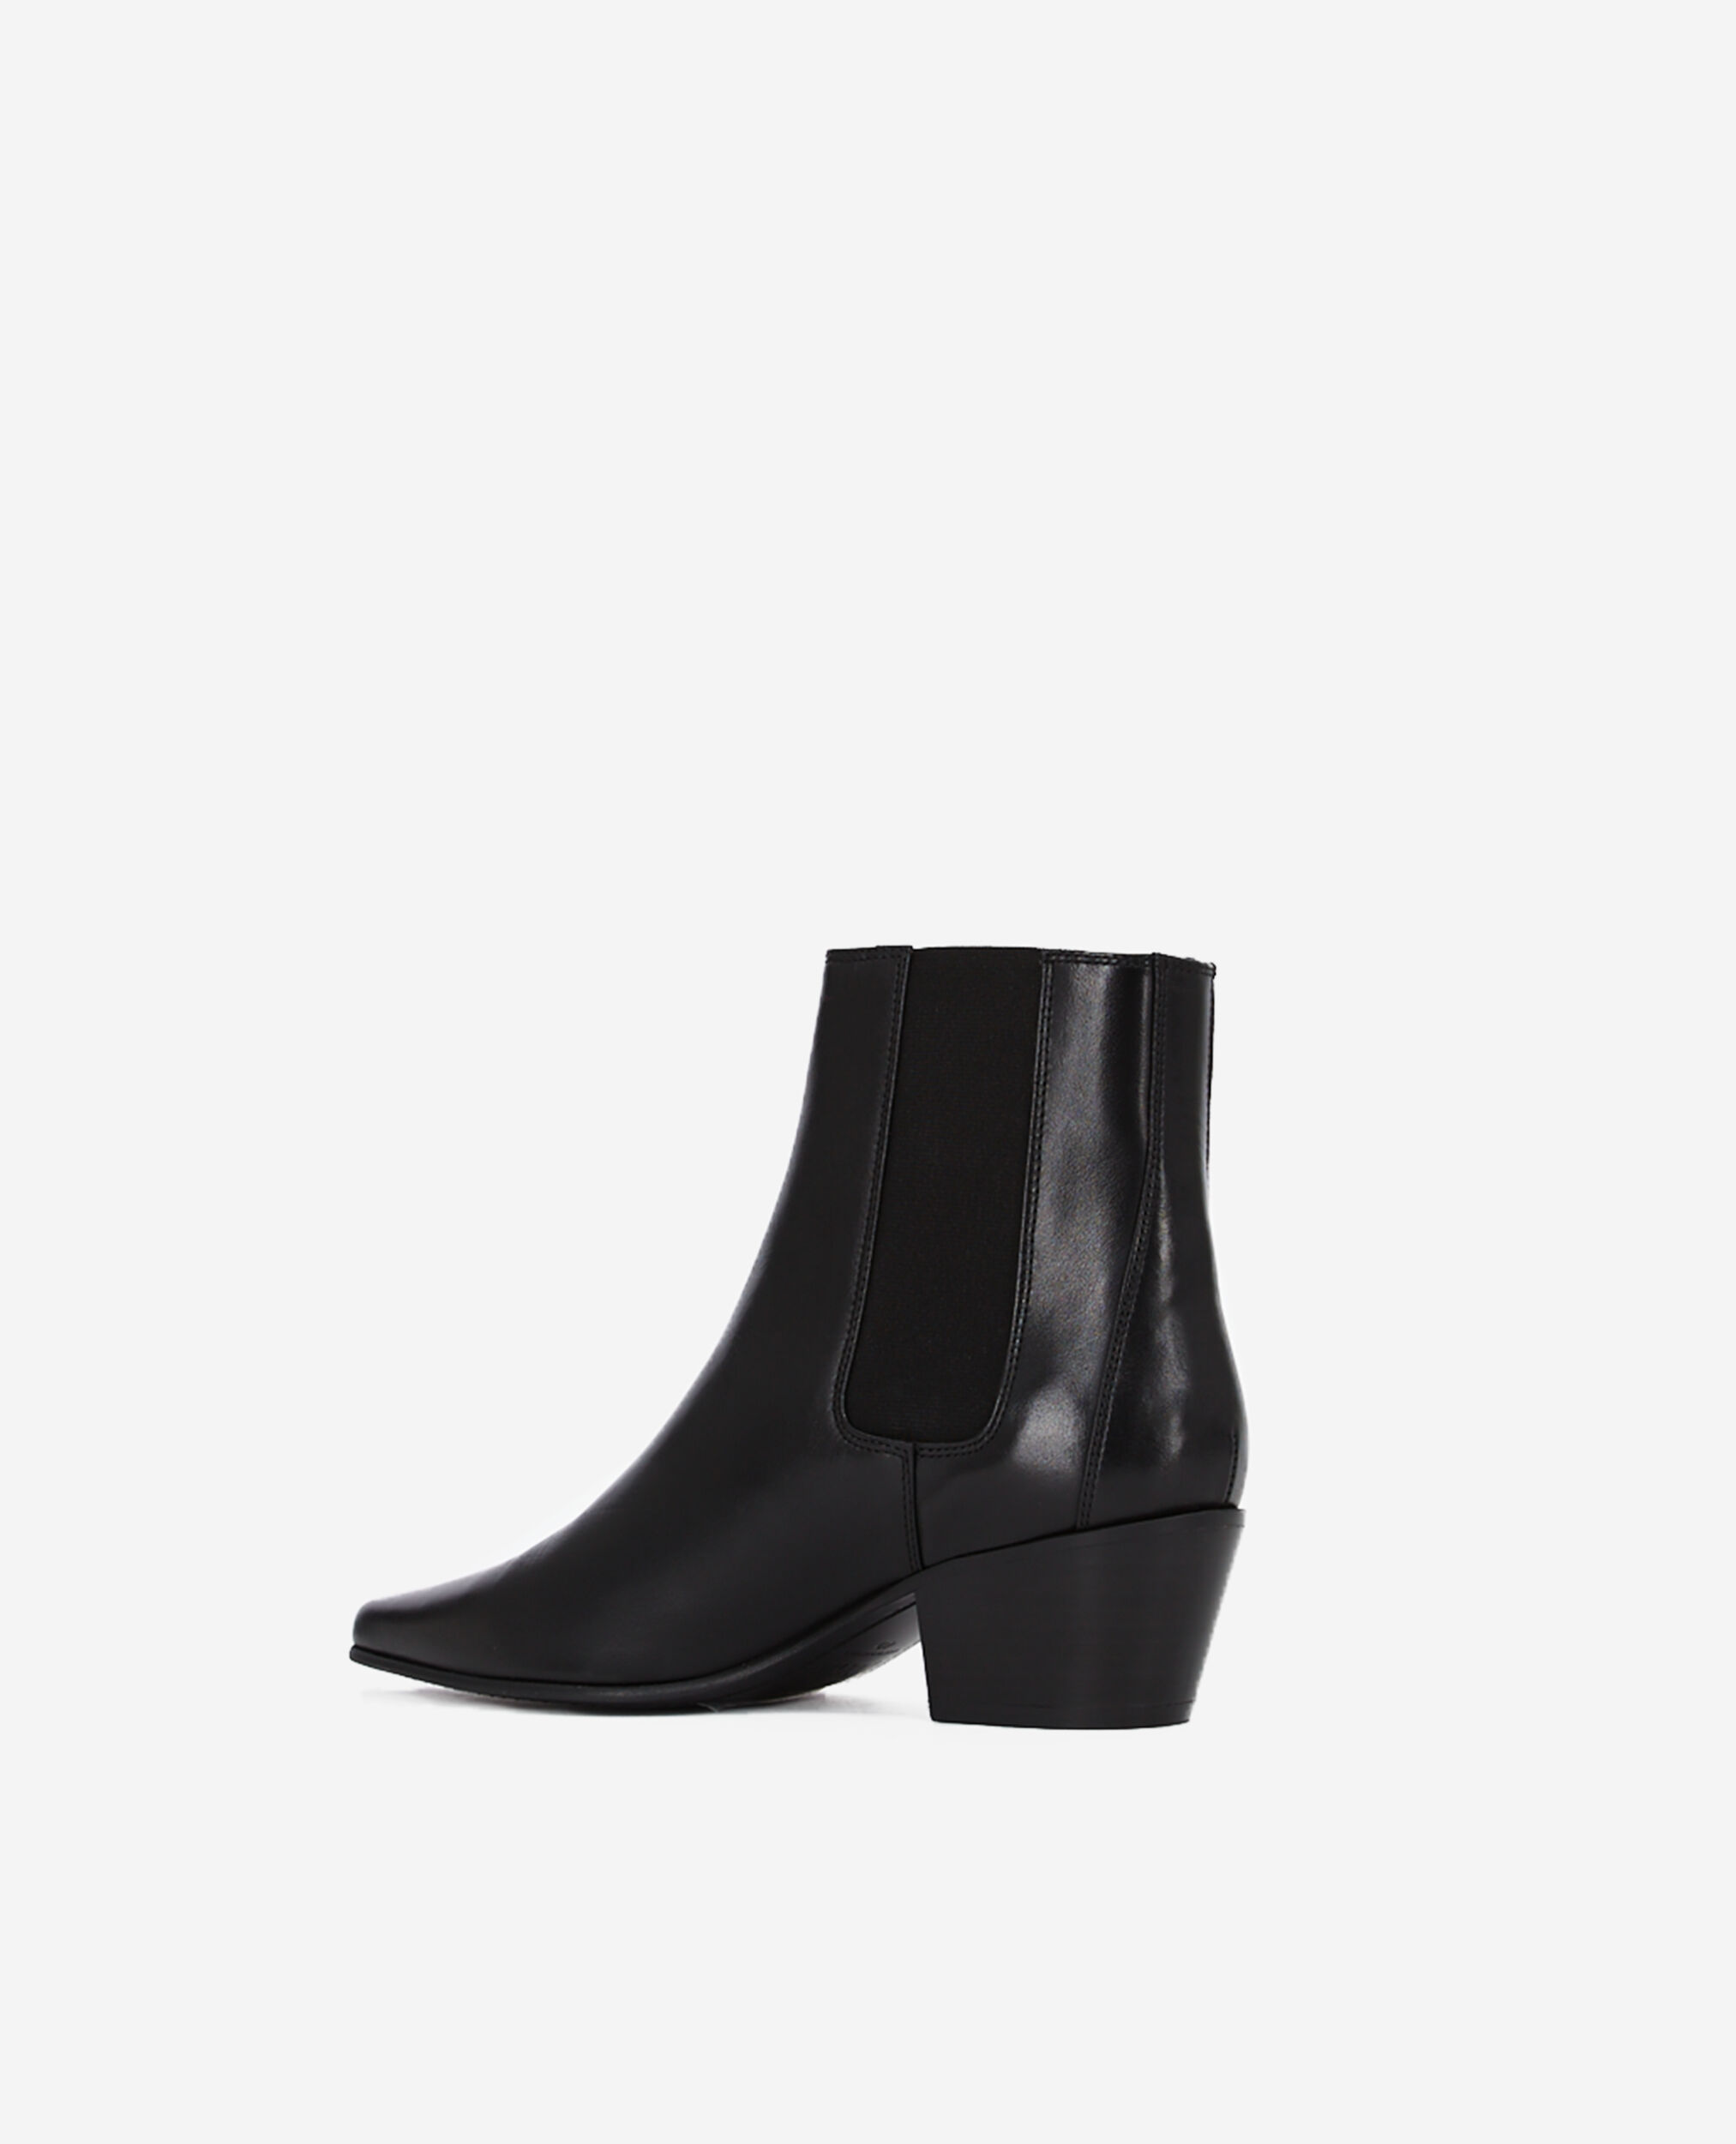 Black leather ankle boots | The Kooples - US